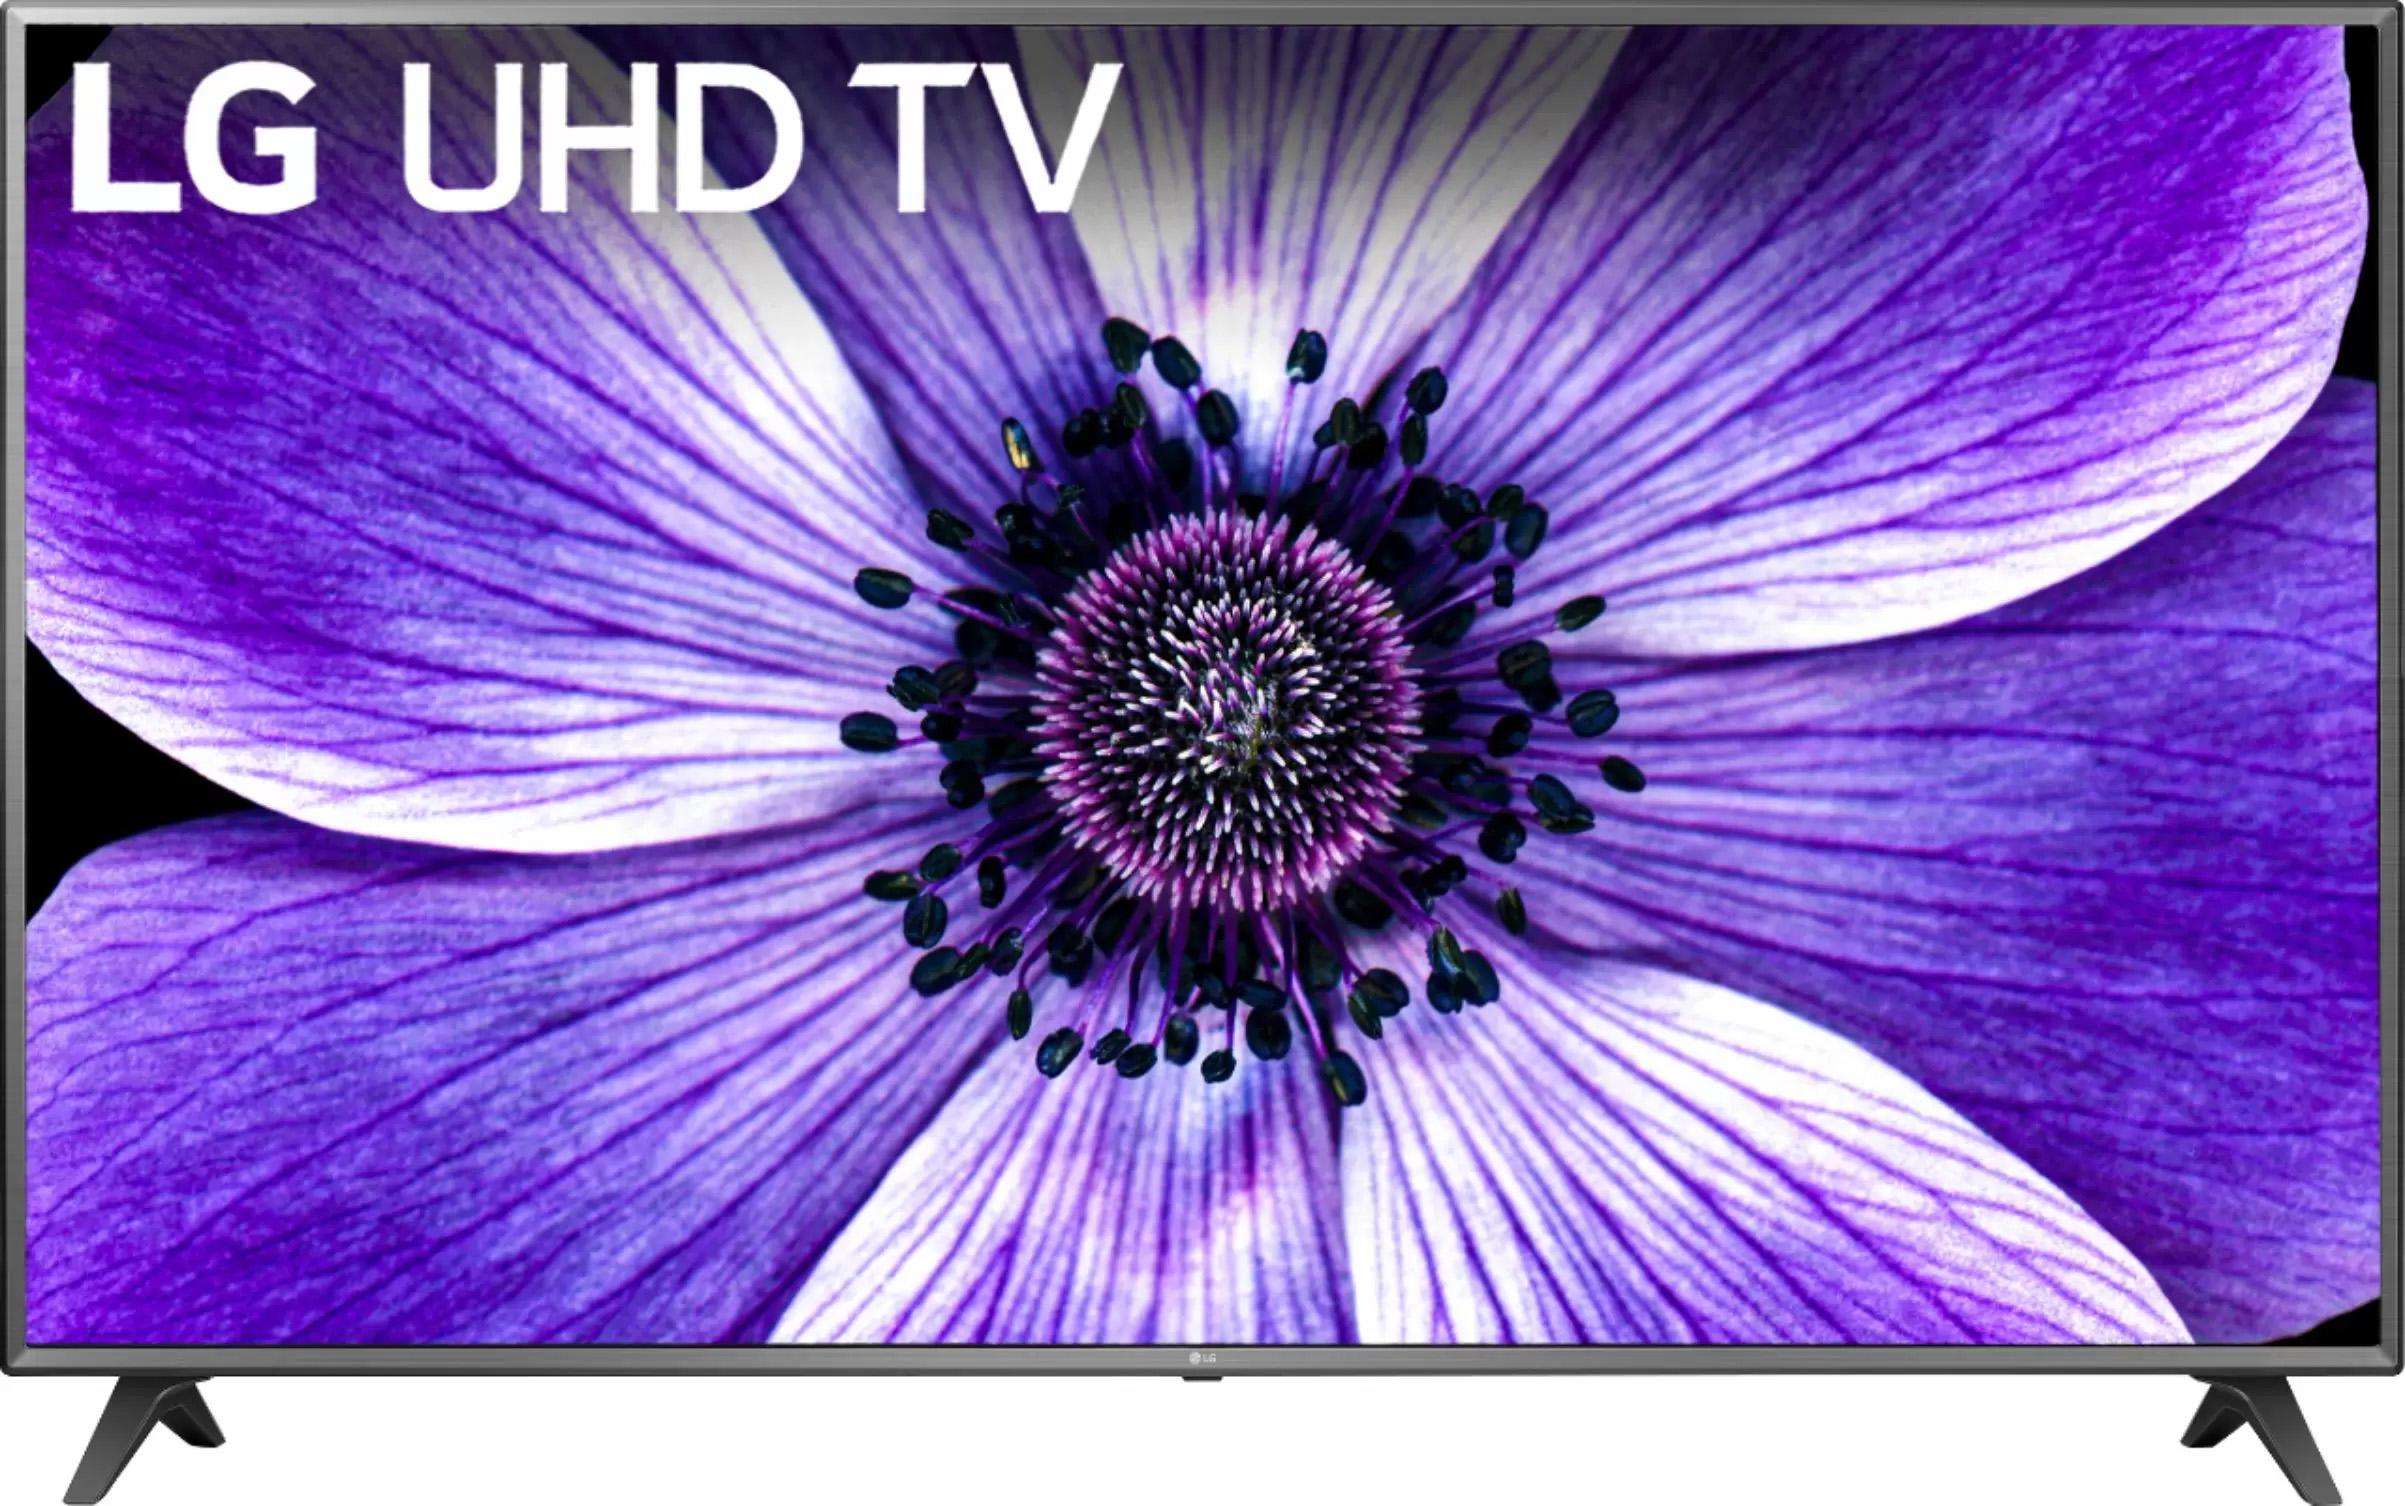 75in LG 75UN6970PUD 4K UHD Smart webOS TV for $649.99 Shipped